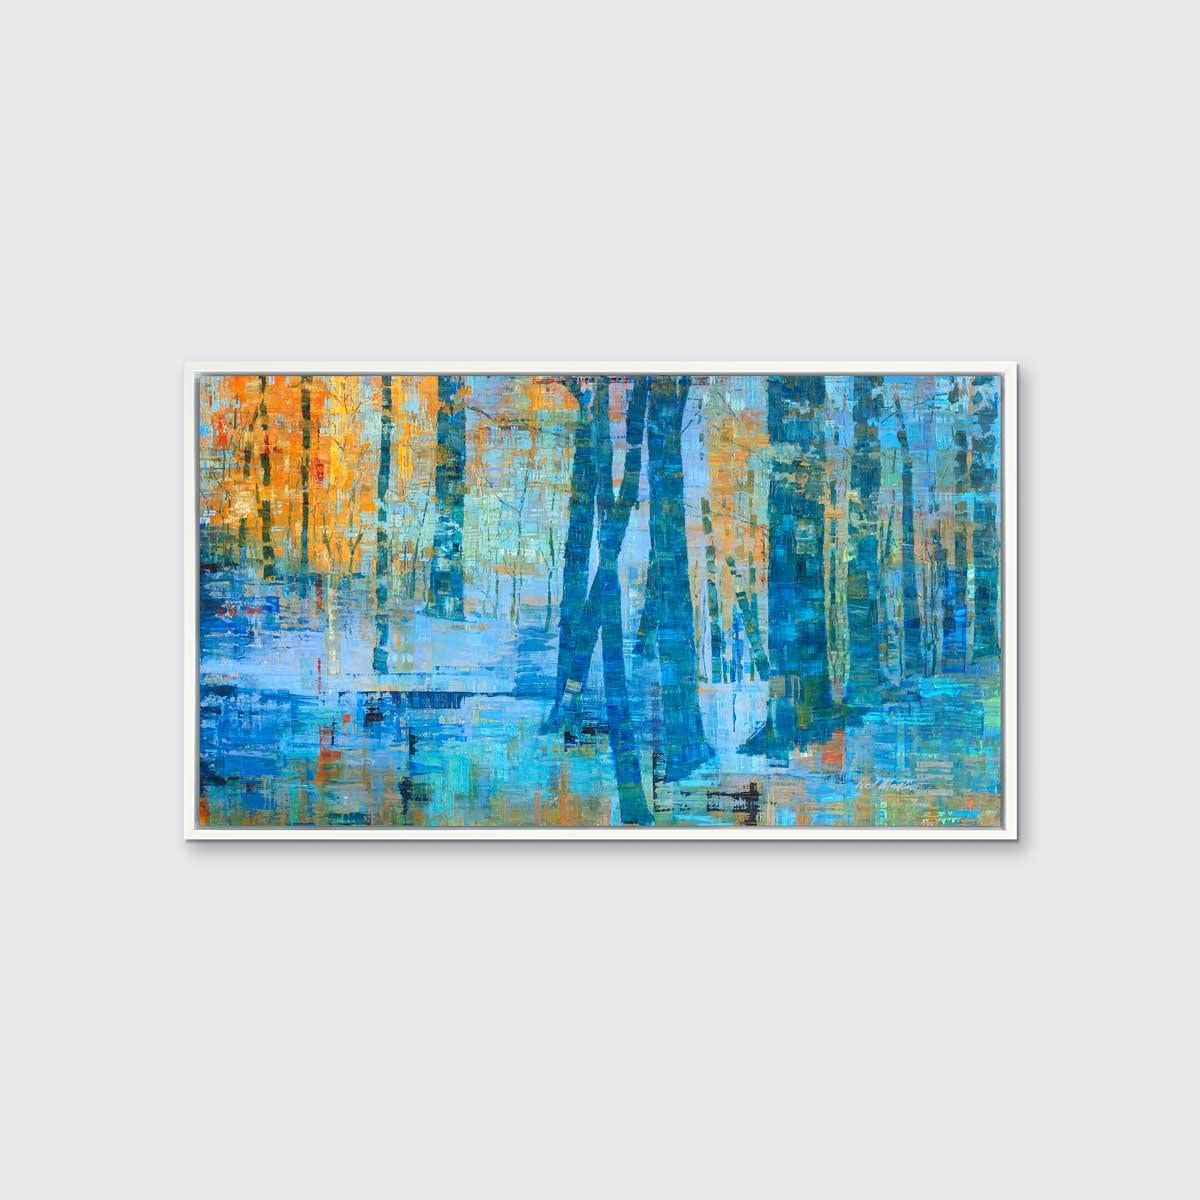 This limited edition abstract landscape print by artist Ned Martin depicts an abstracted forest with deep blues and vibrant orange hues. Tree trunks are visible spanning the width of the painting, some smaller as they recede further away from the